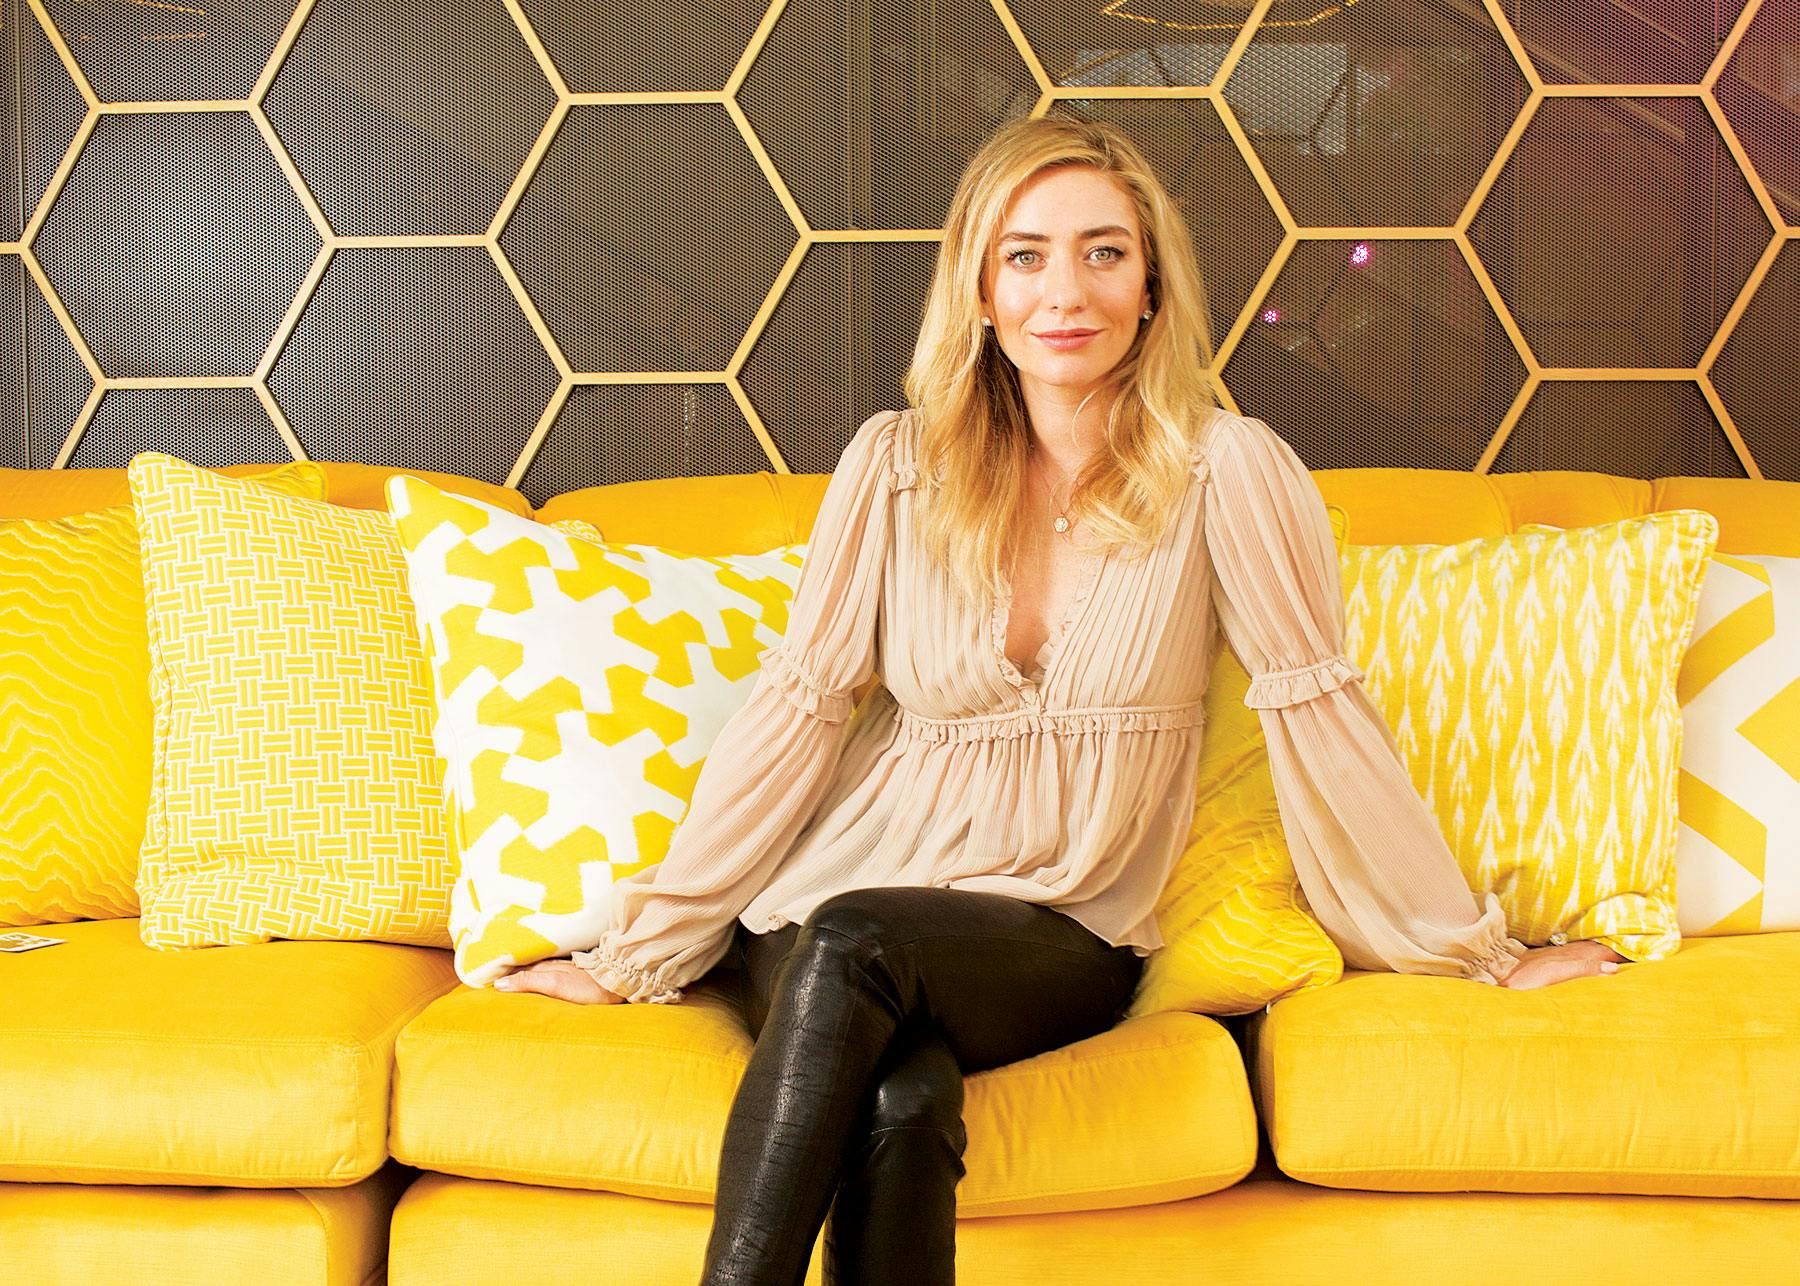 Sleeping Teen Sluts - How Whitney Wolfe Herd Changed the Dating Game â€“ Texas Monthly